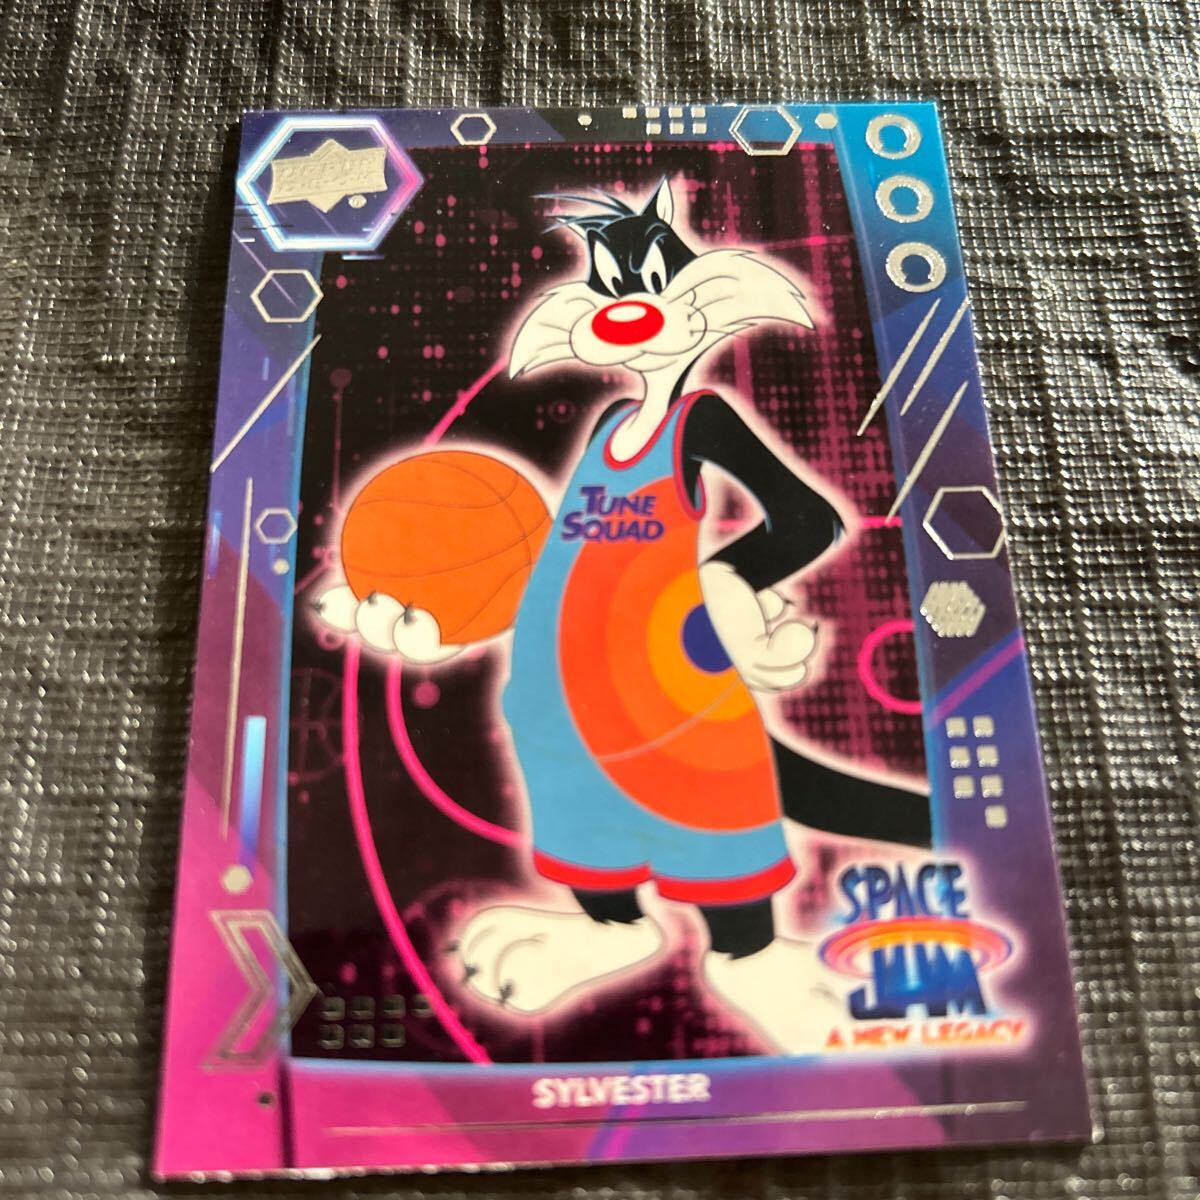 2021 UpperDeck Space Jam A New Legacy Lebron James 他10カード　レブロンジェームス　ロスアンゼルスレイカーズ　　_画像7